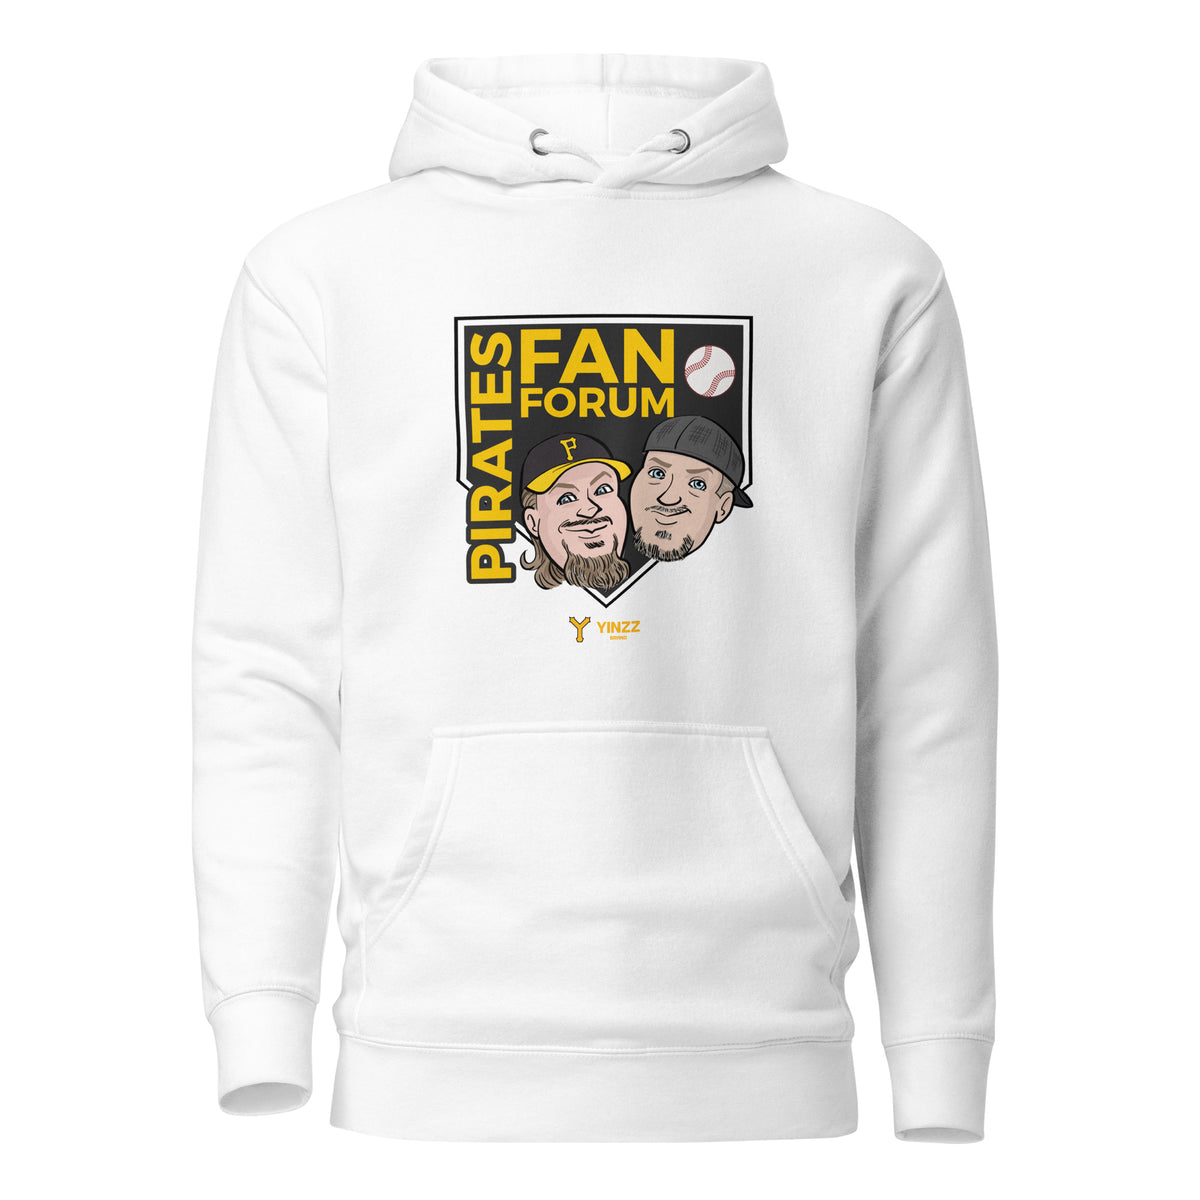 The Official Hoodie of the Pirates Fan Forum | YINZZ